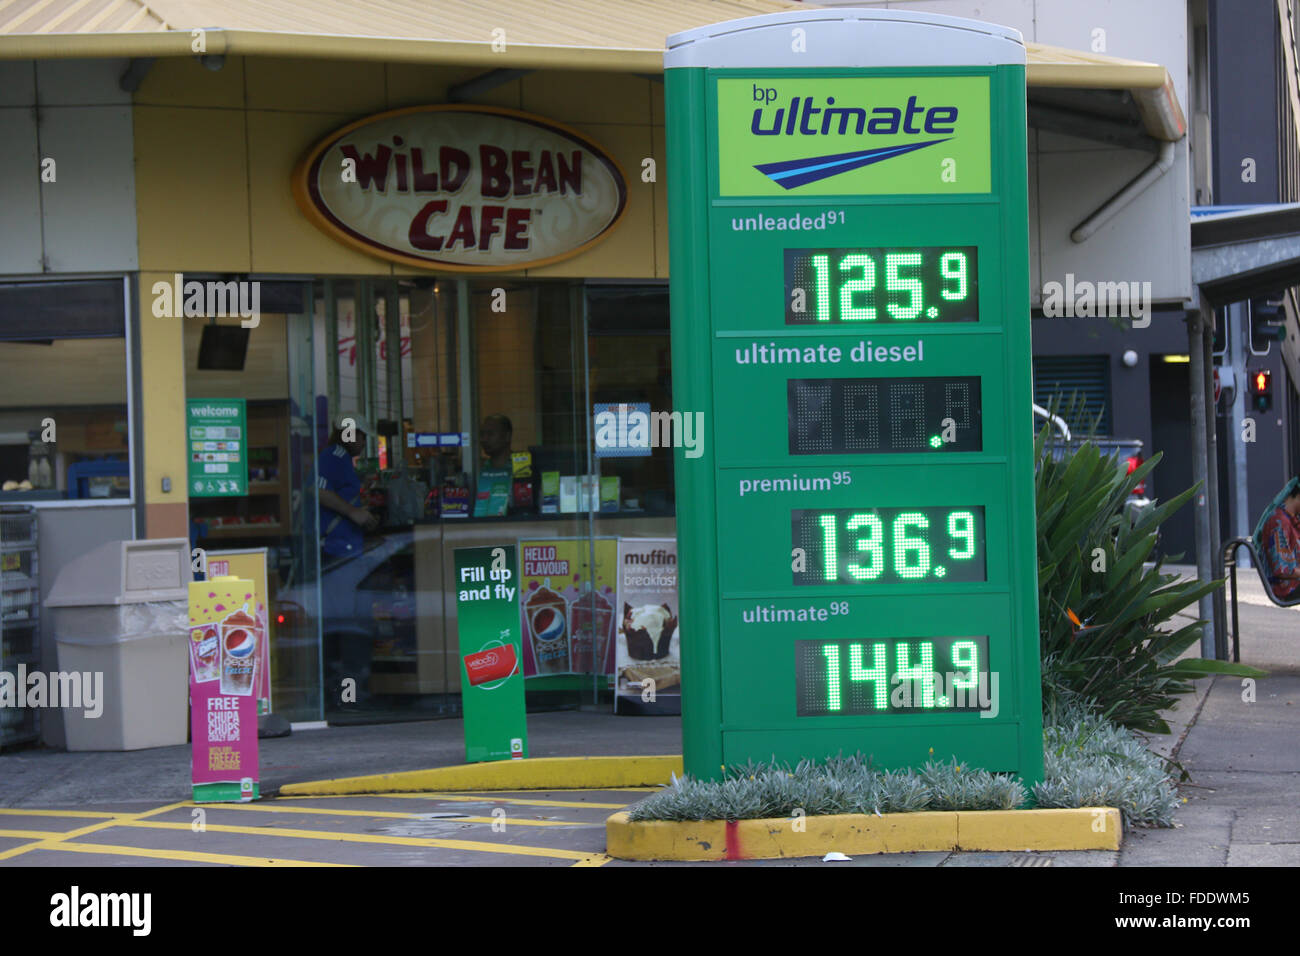 Petrol prices at the BP service station on Parramatta Road, Sydney Stock Photo, Royalty Free